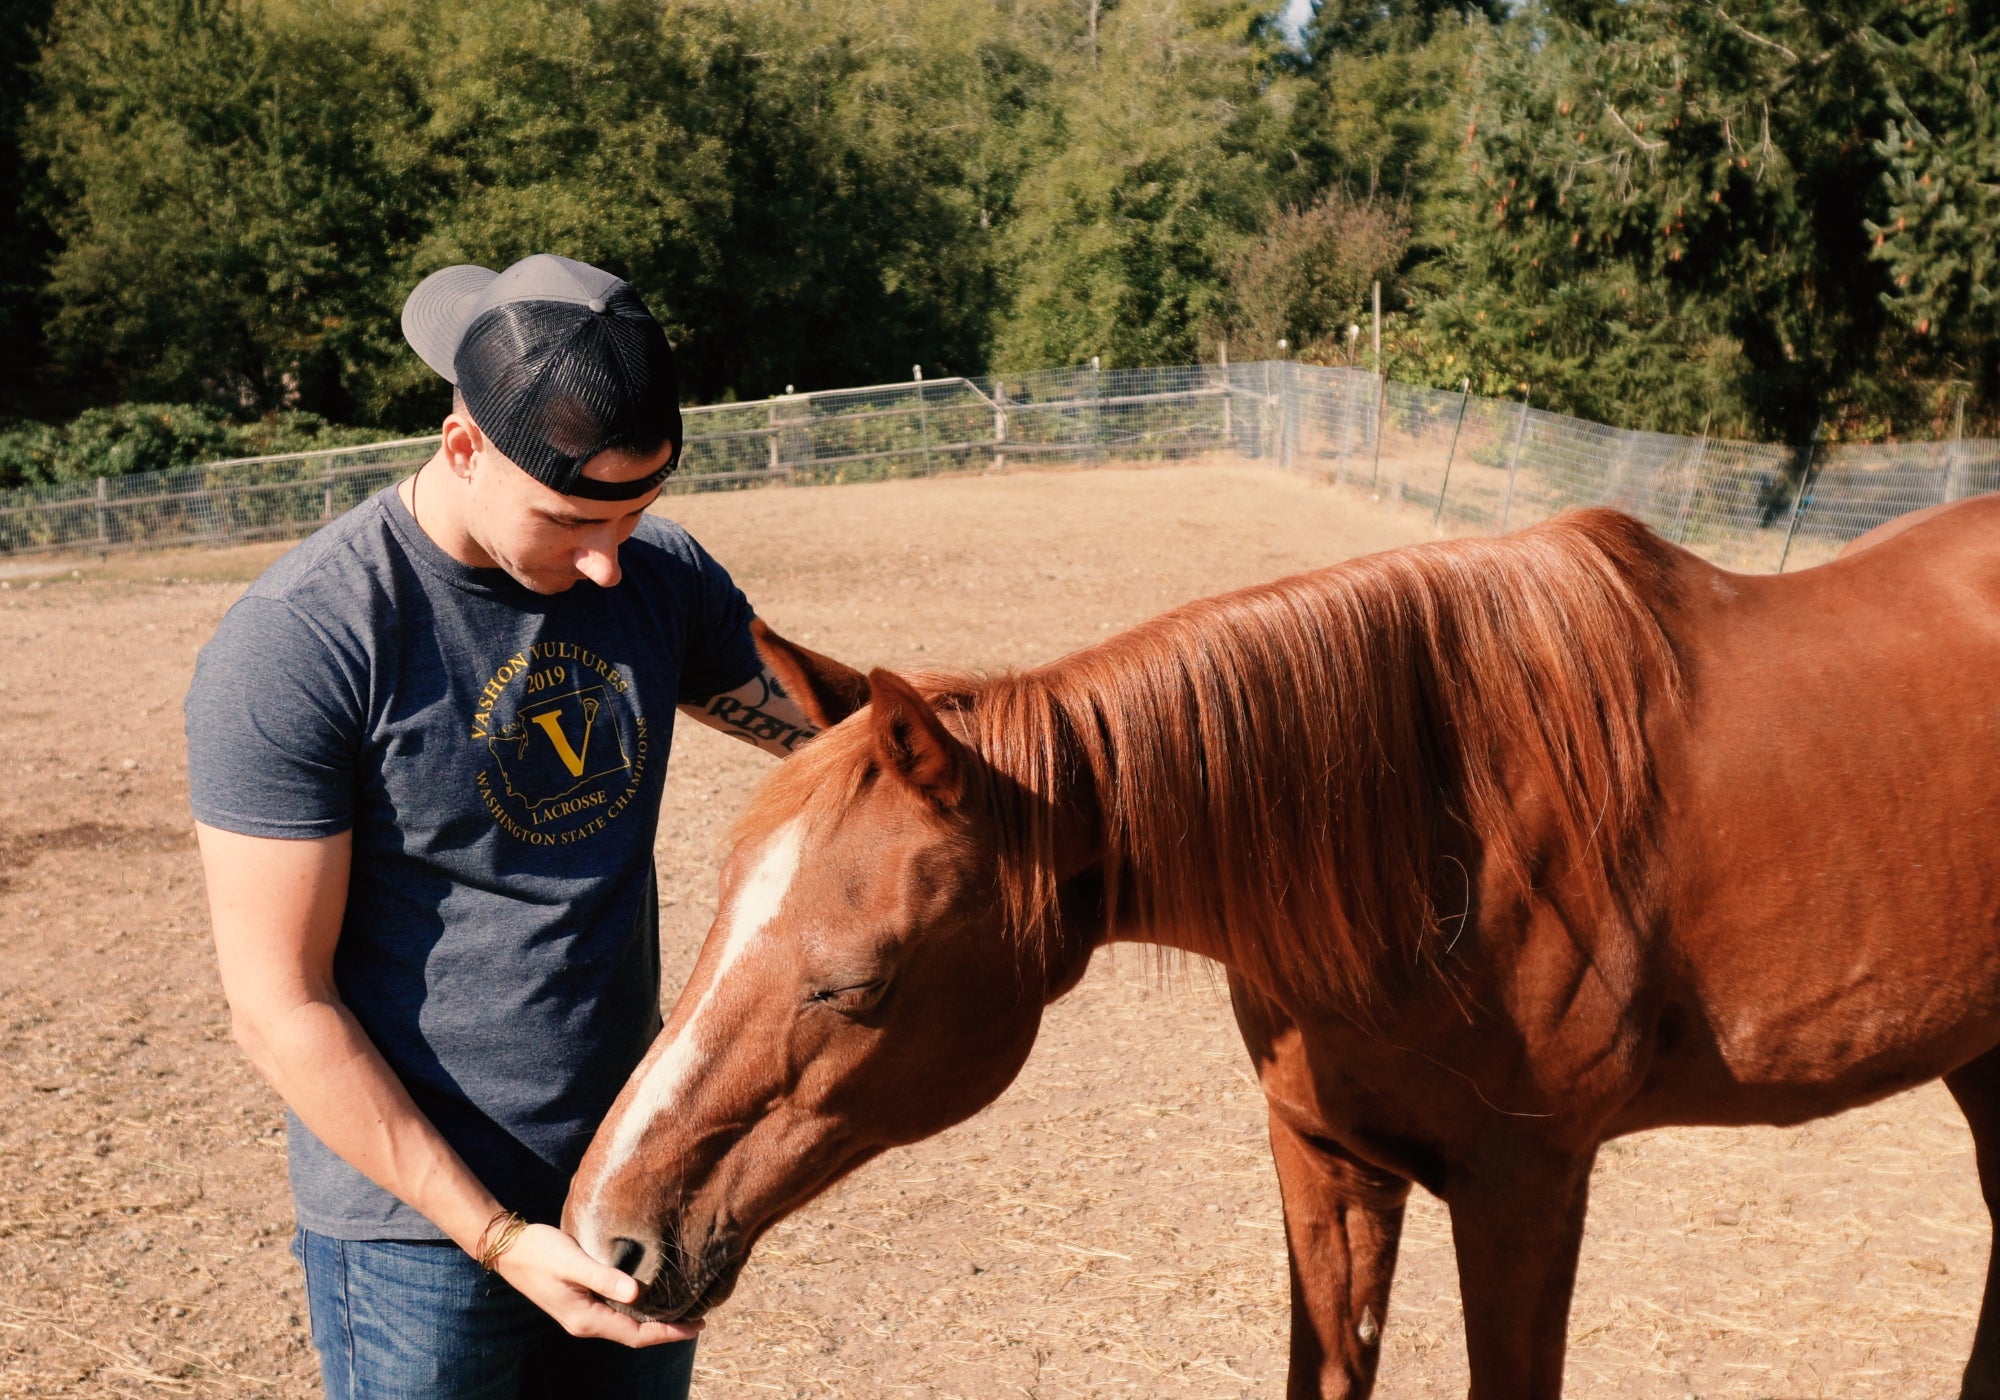 Headley Holistics and Evolved Remedies Founder, Tristan, embracing one of their rescued horses, ranger, in a sweet and tender moment